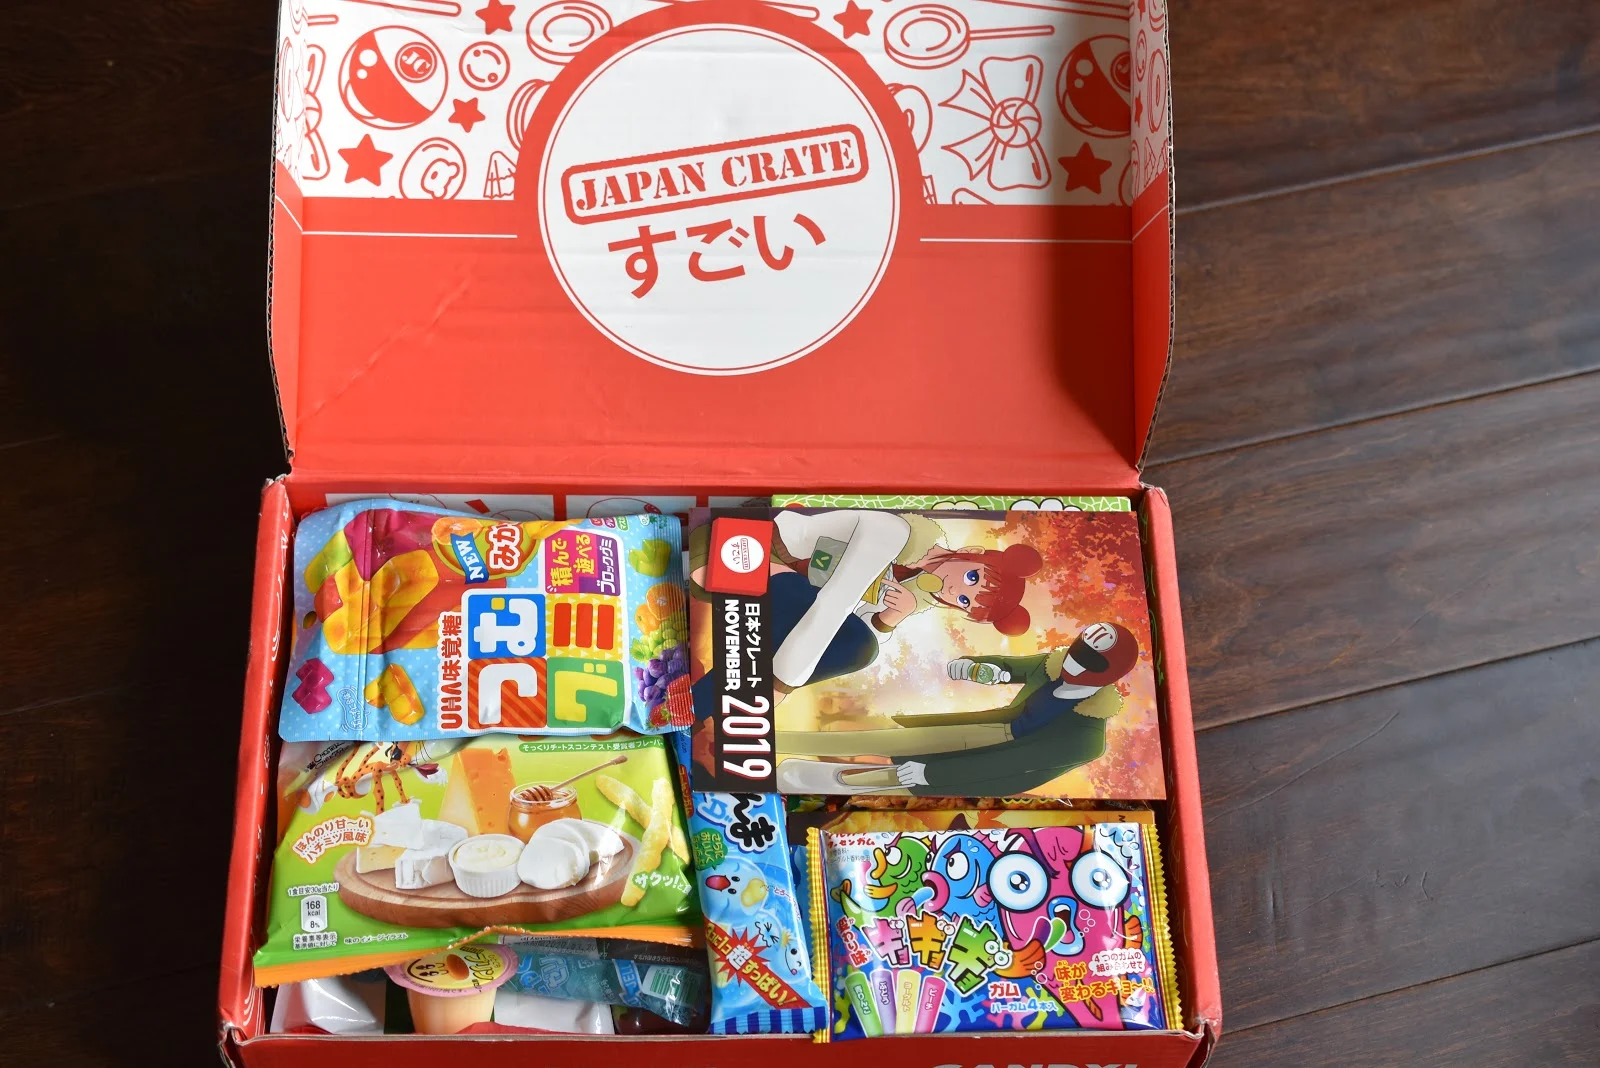 Video: Japan Crate November Snacks and Candy Box Review